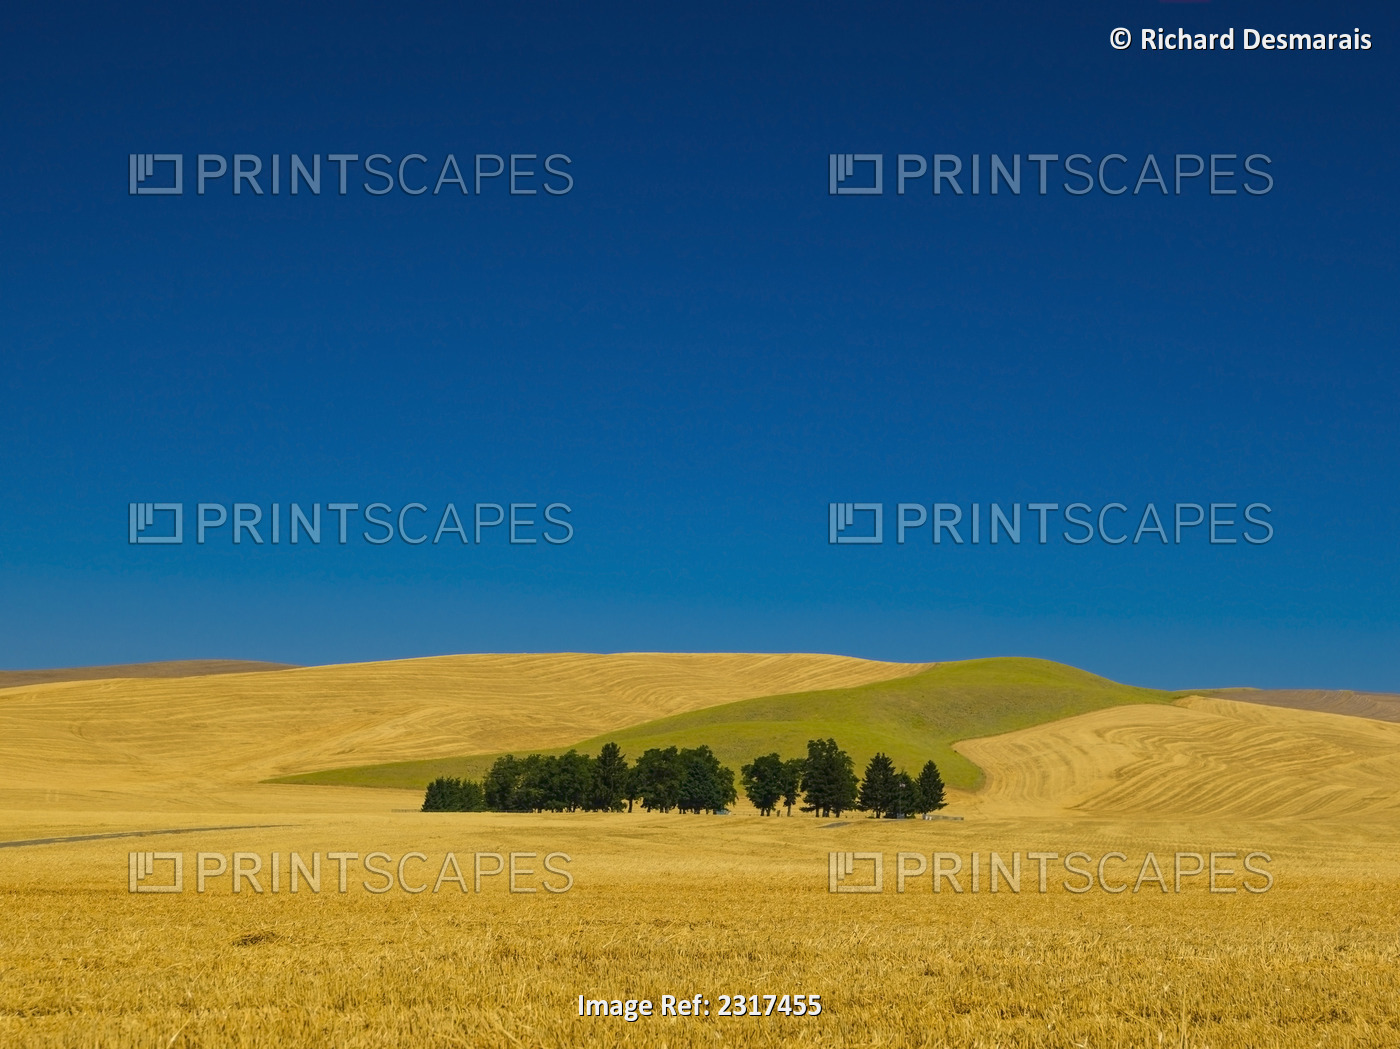 Cemetery with trees in a wheat field;Washington united states of america